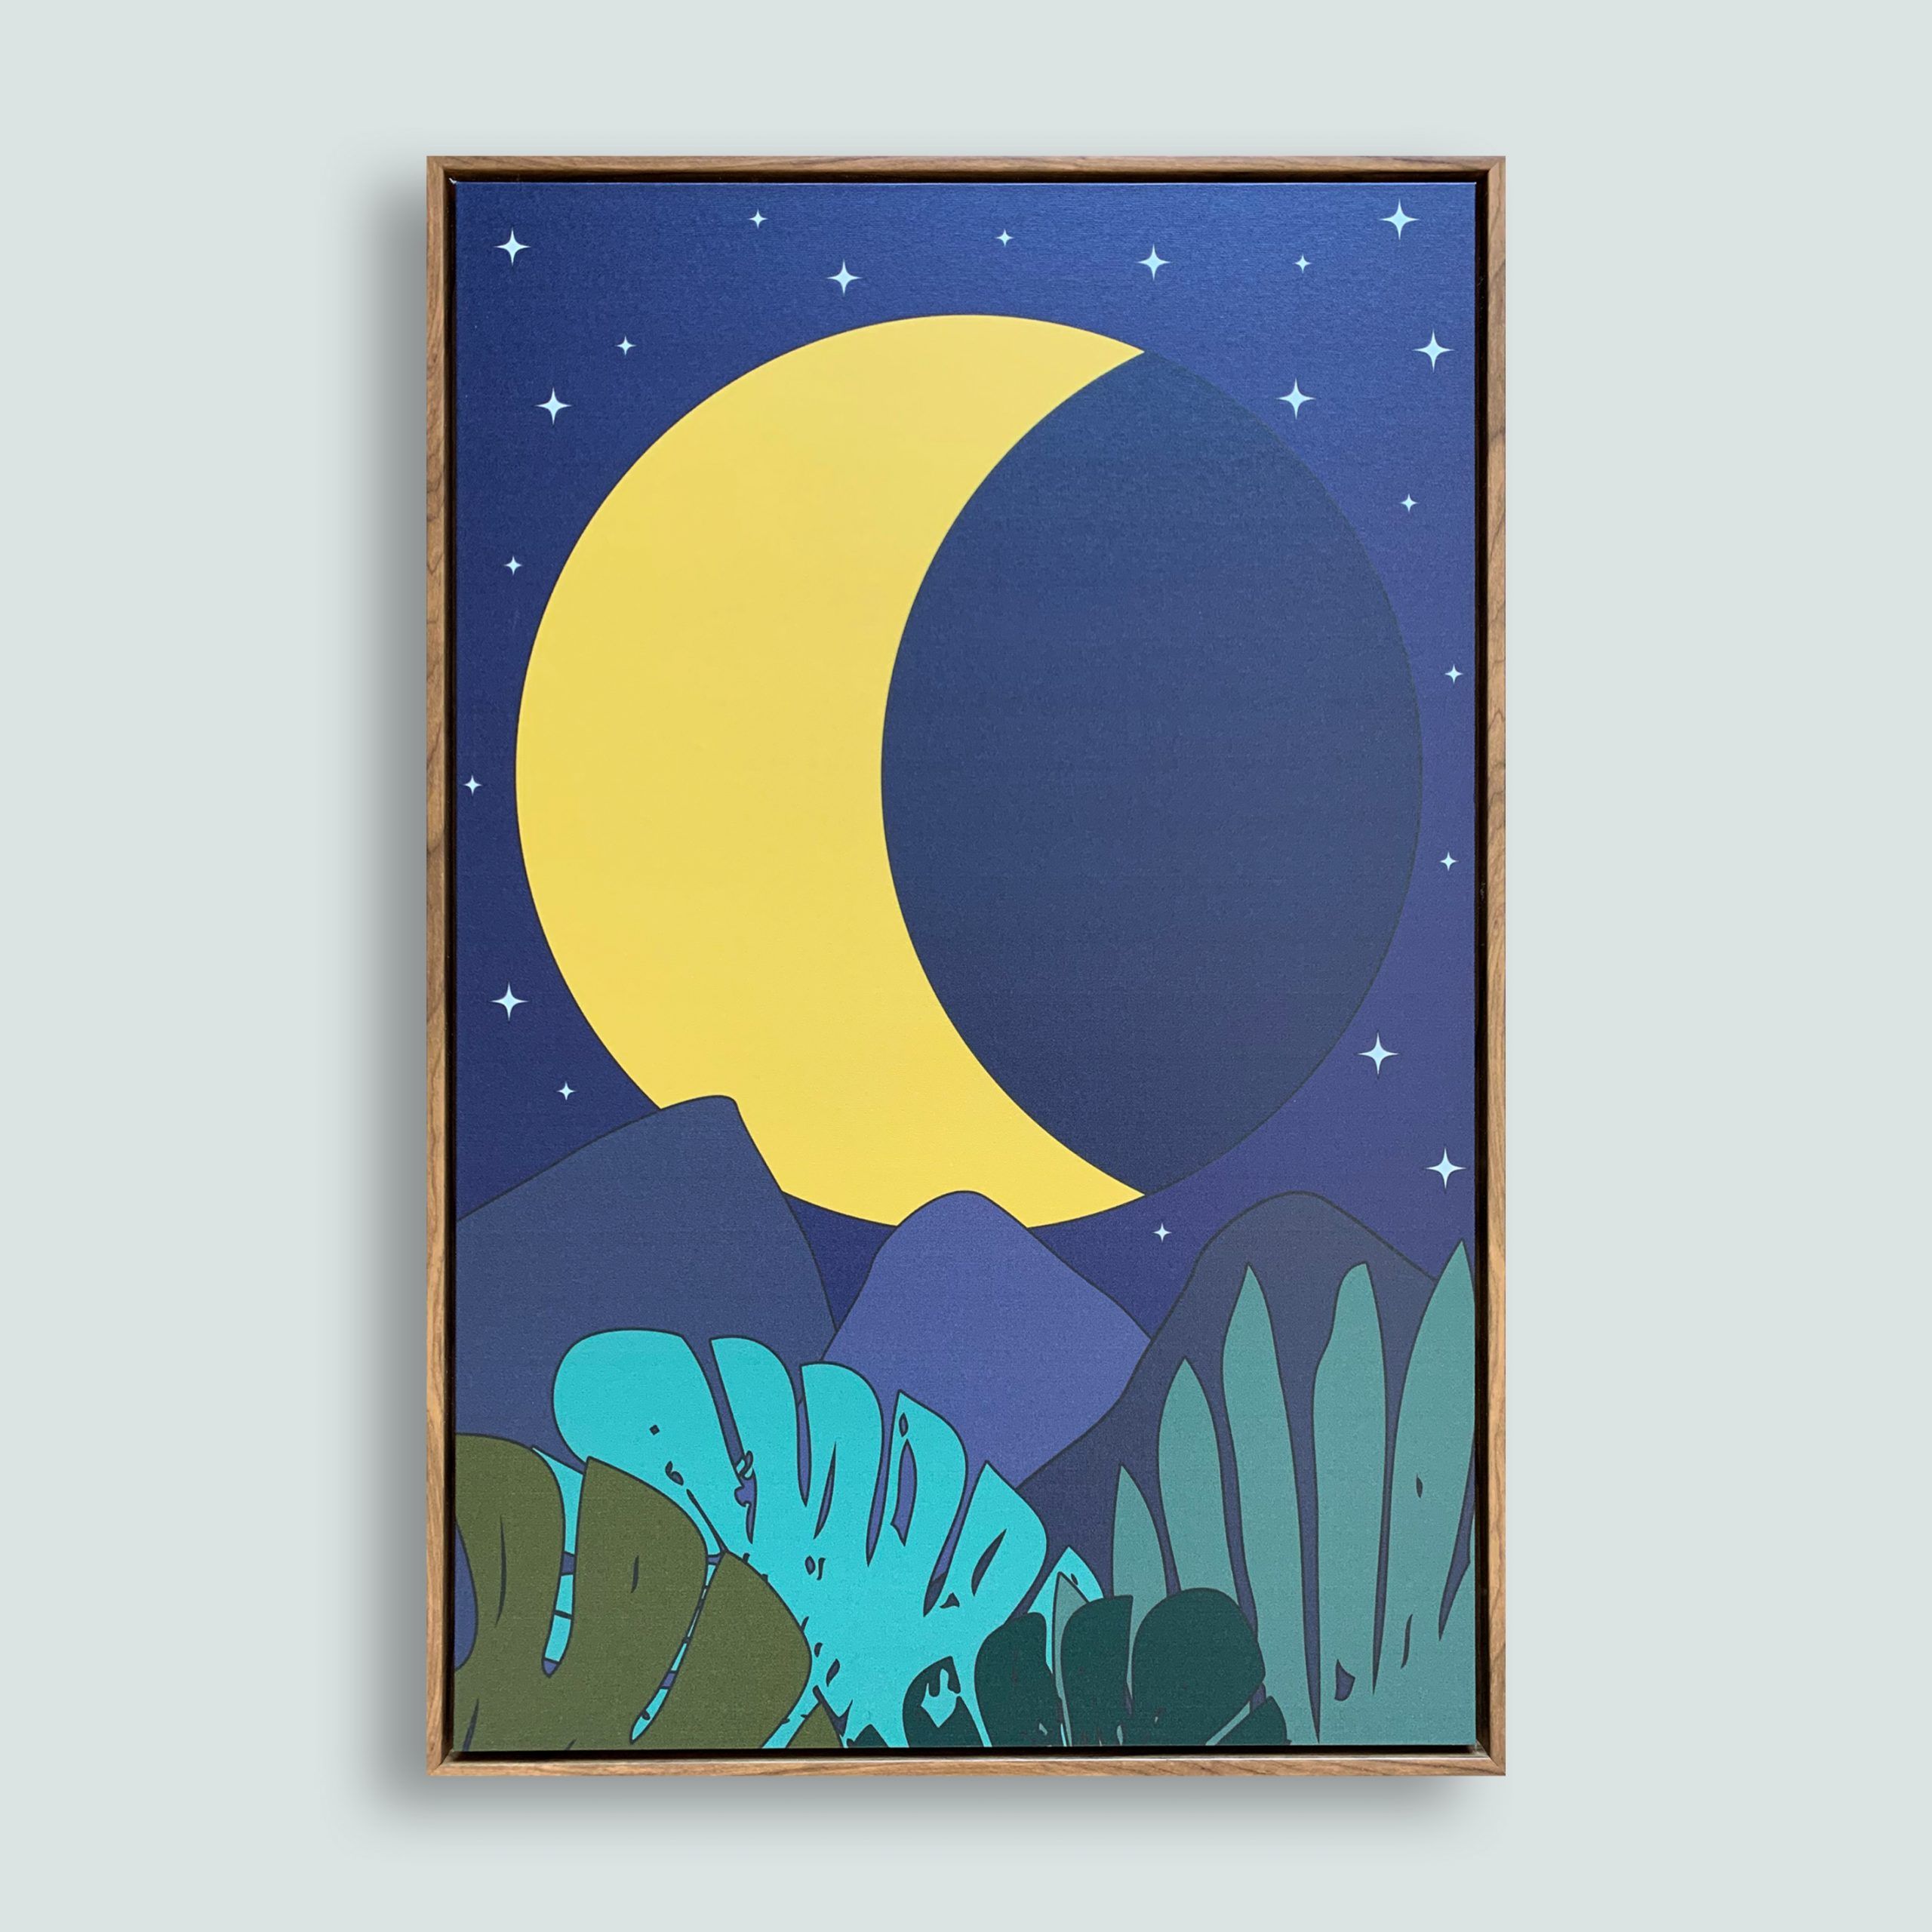 Tropical Night Moon Wall Art – Wonderful Whirl With Regard To Most Up To Date Tropical Evening Wall Art (View 6 of 20)